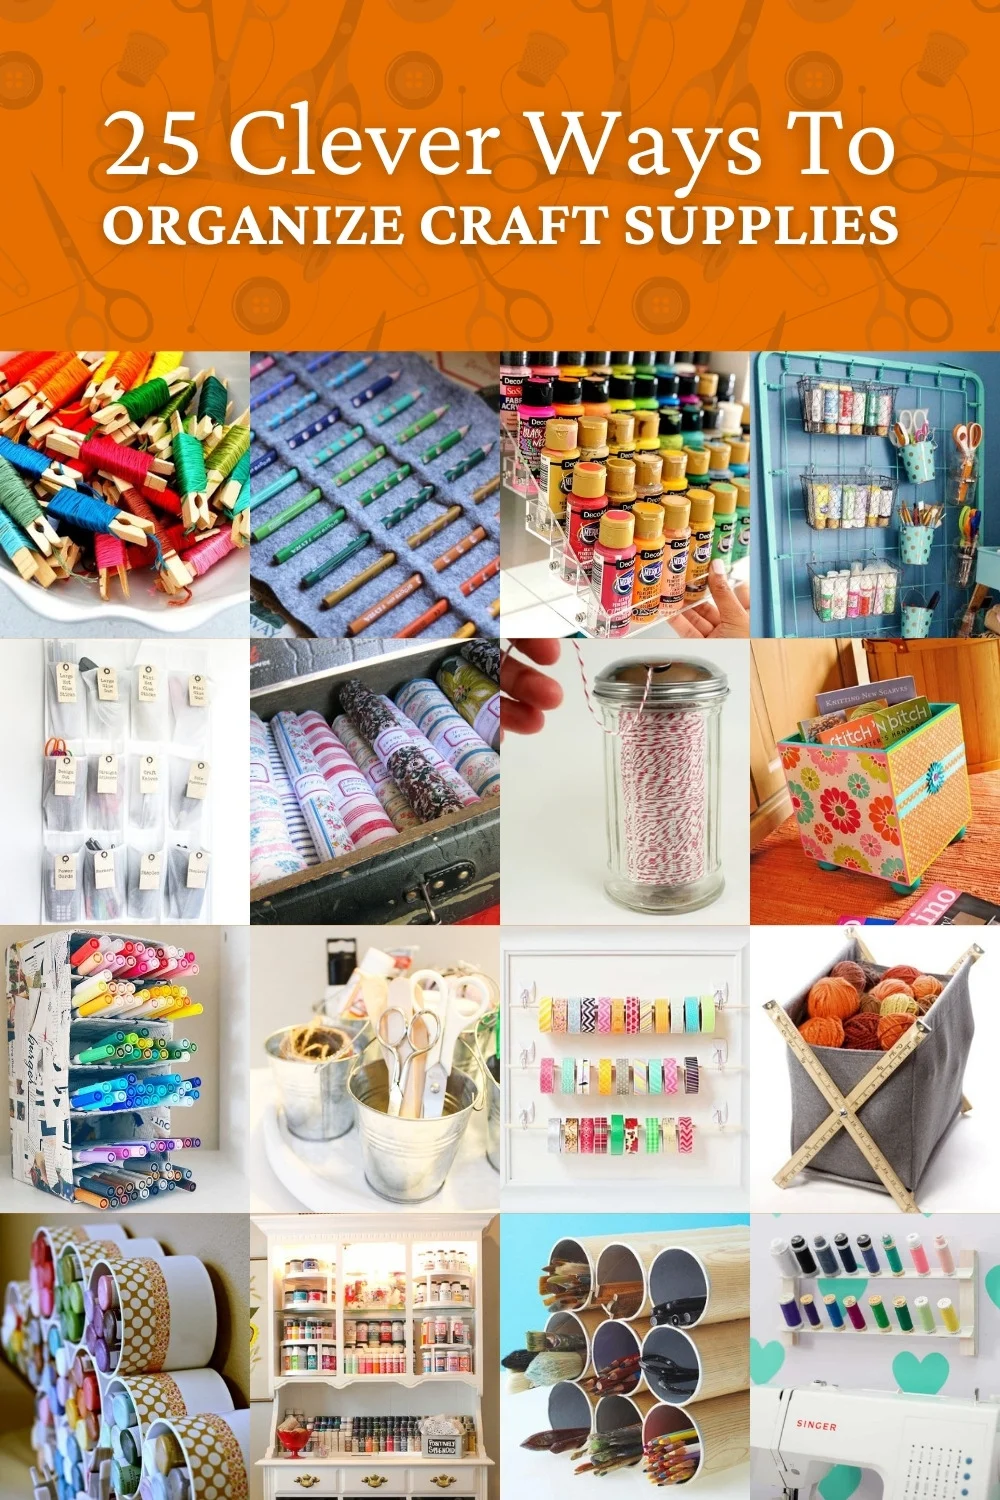 How to Organize Craft Supplies: 25 Clever Ideas!